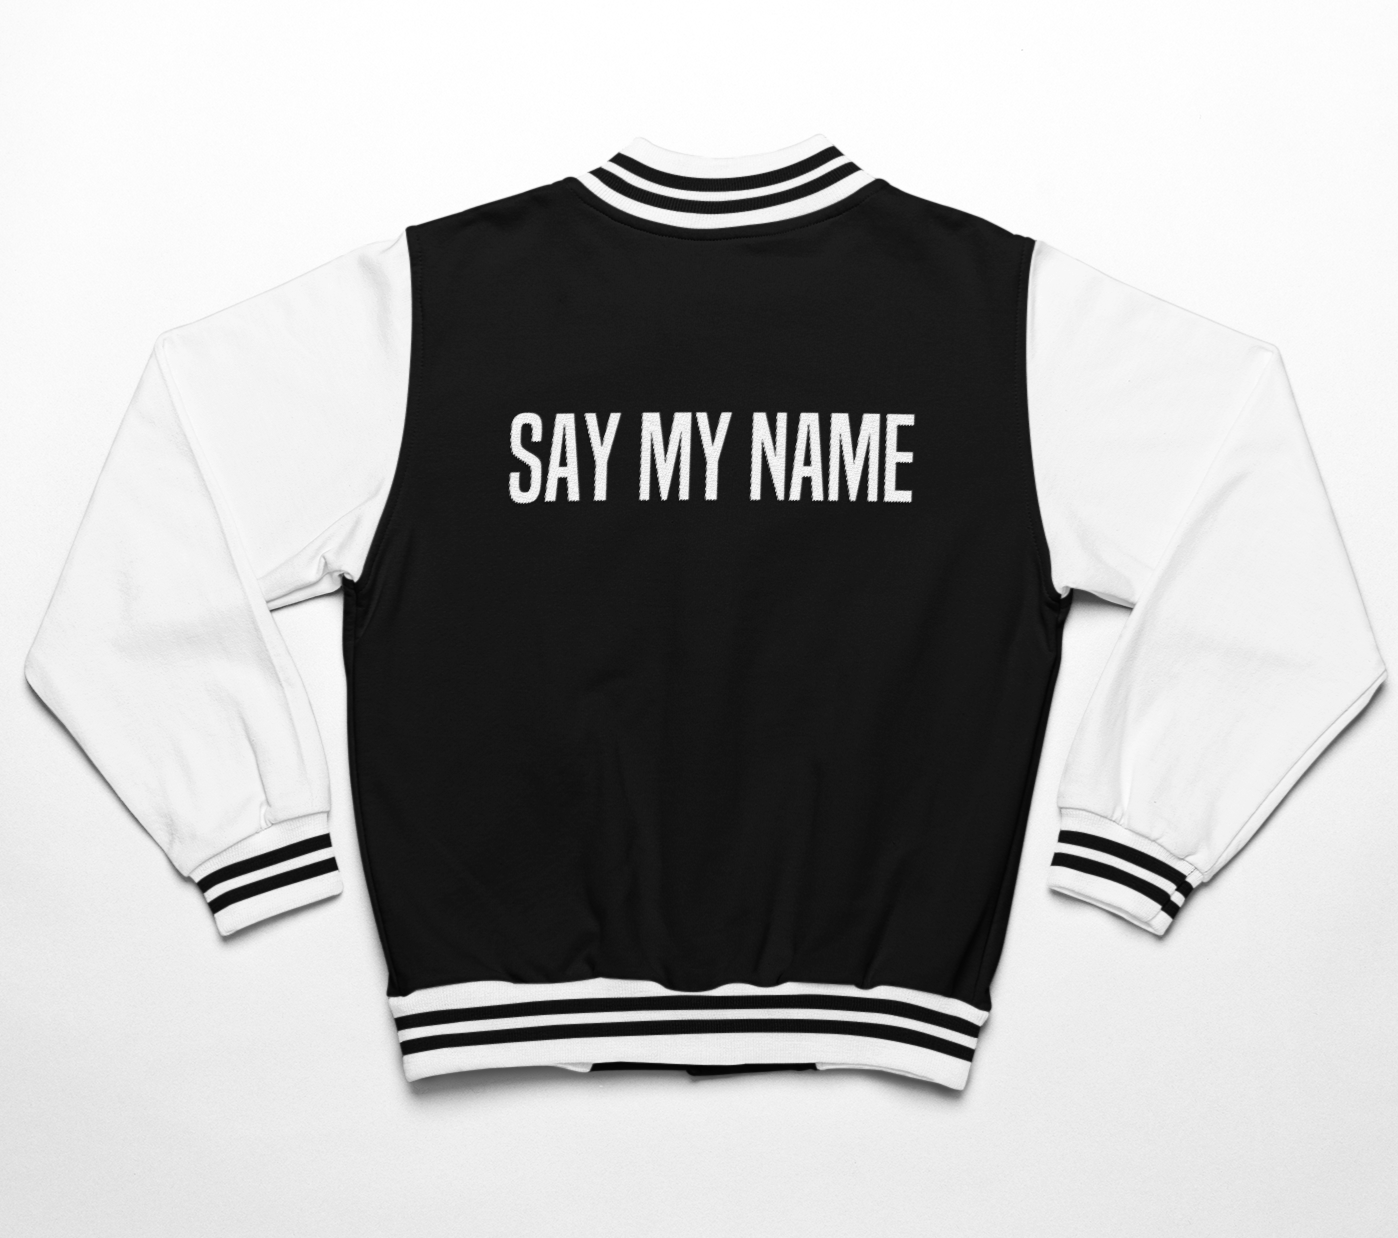 VESTE College CSG Homme "SAY MY NAME"